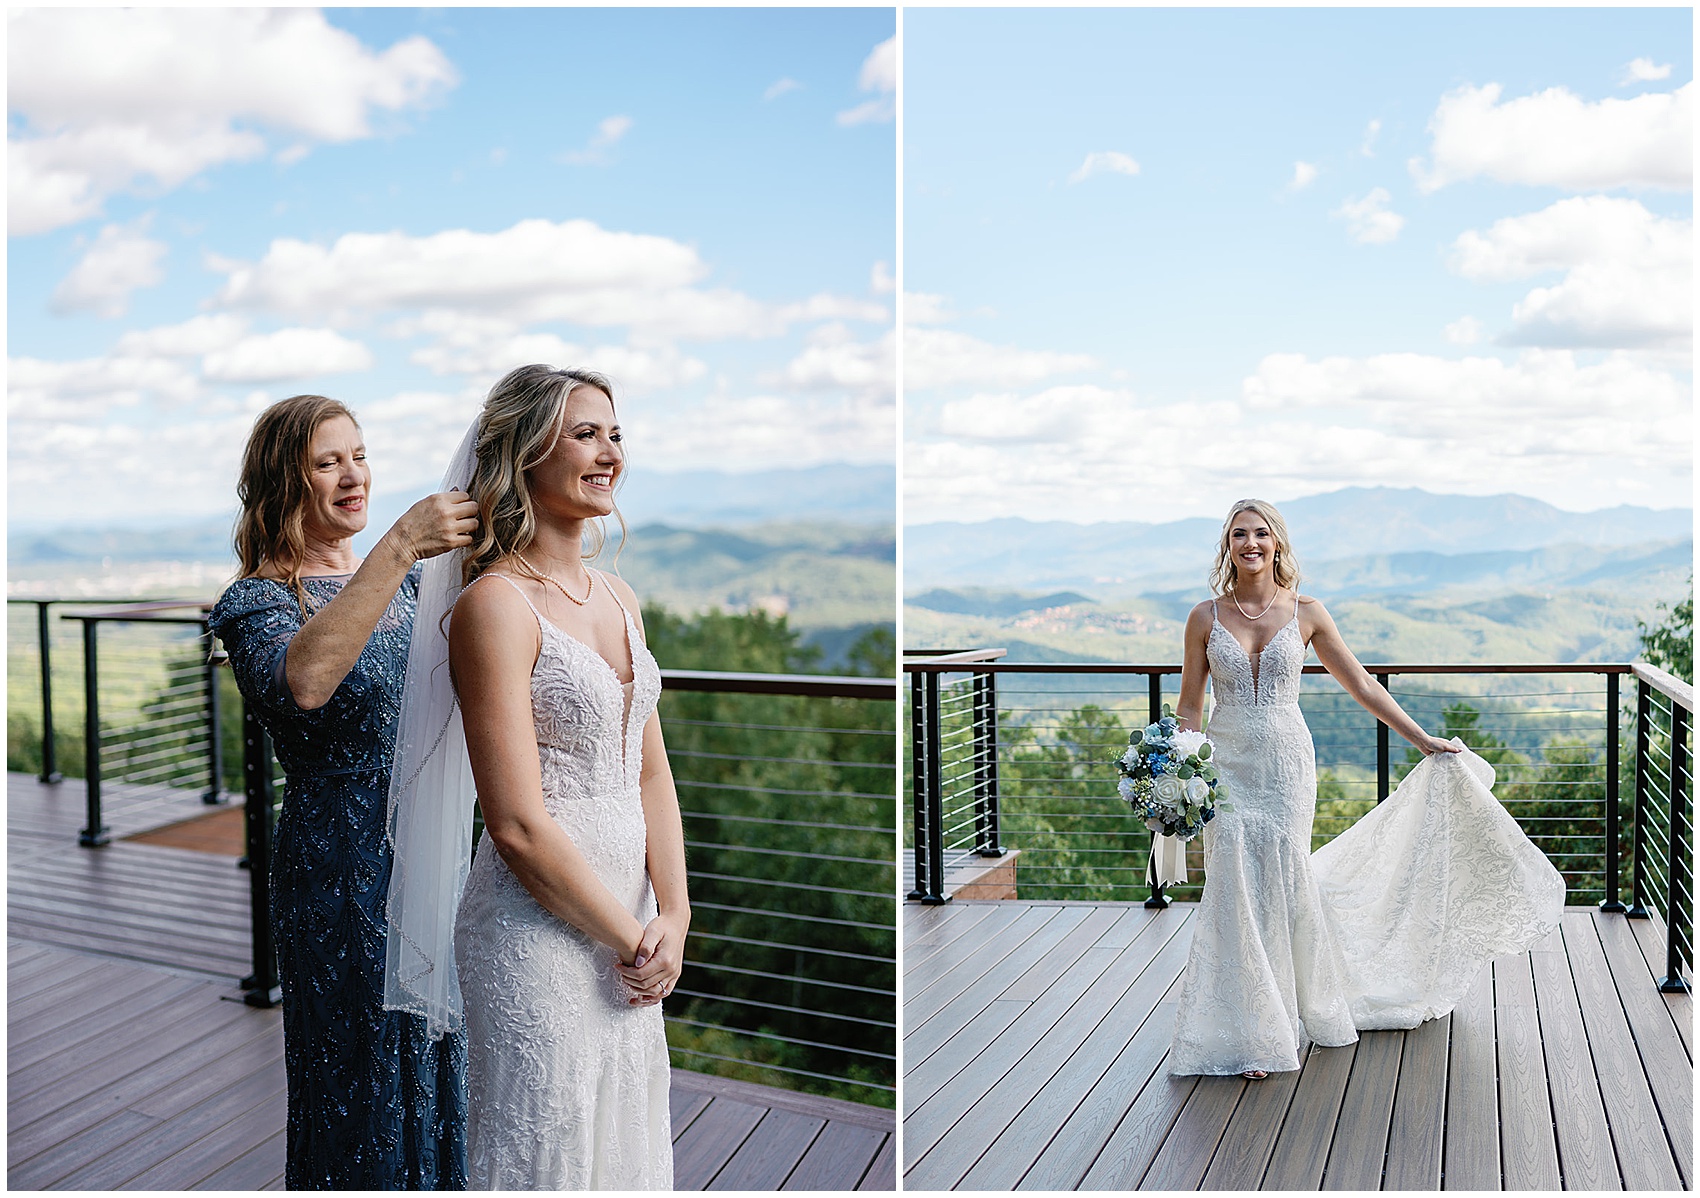 A bride puts on her finishing touches with help from her mom on a large outdoor deck with a mountain view